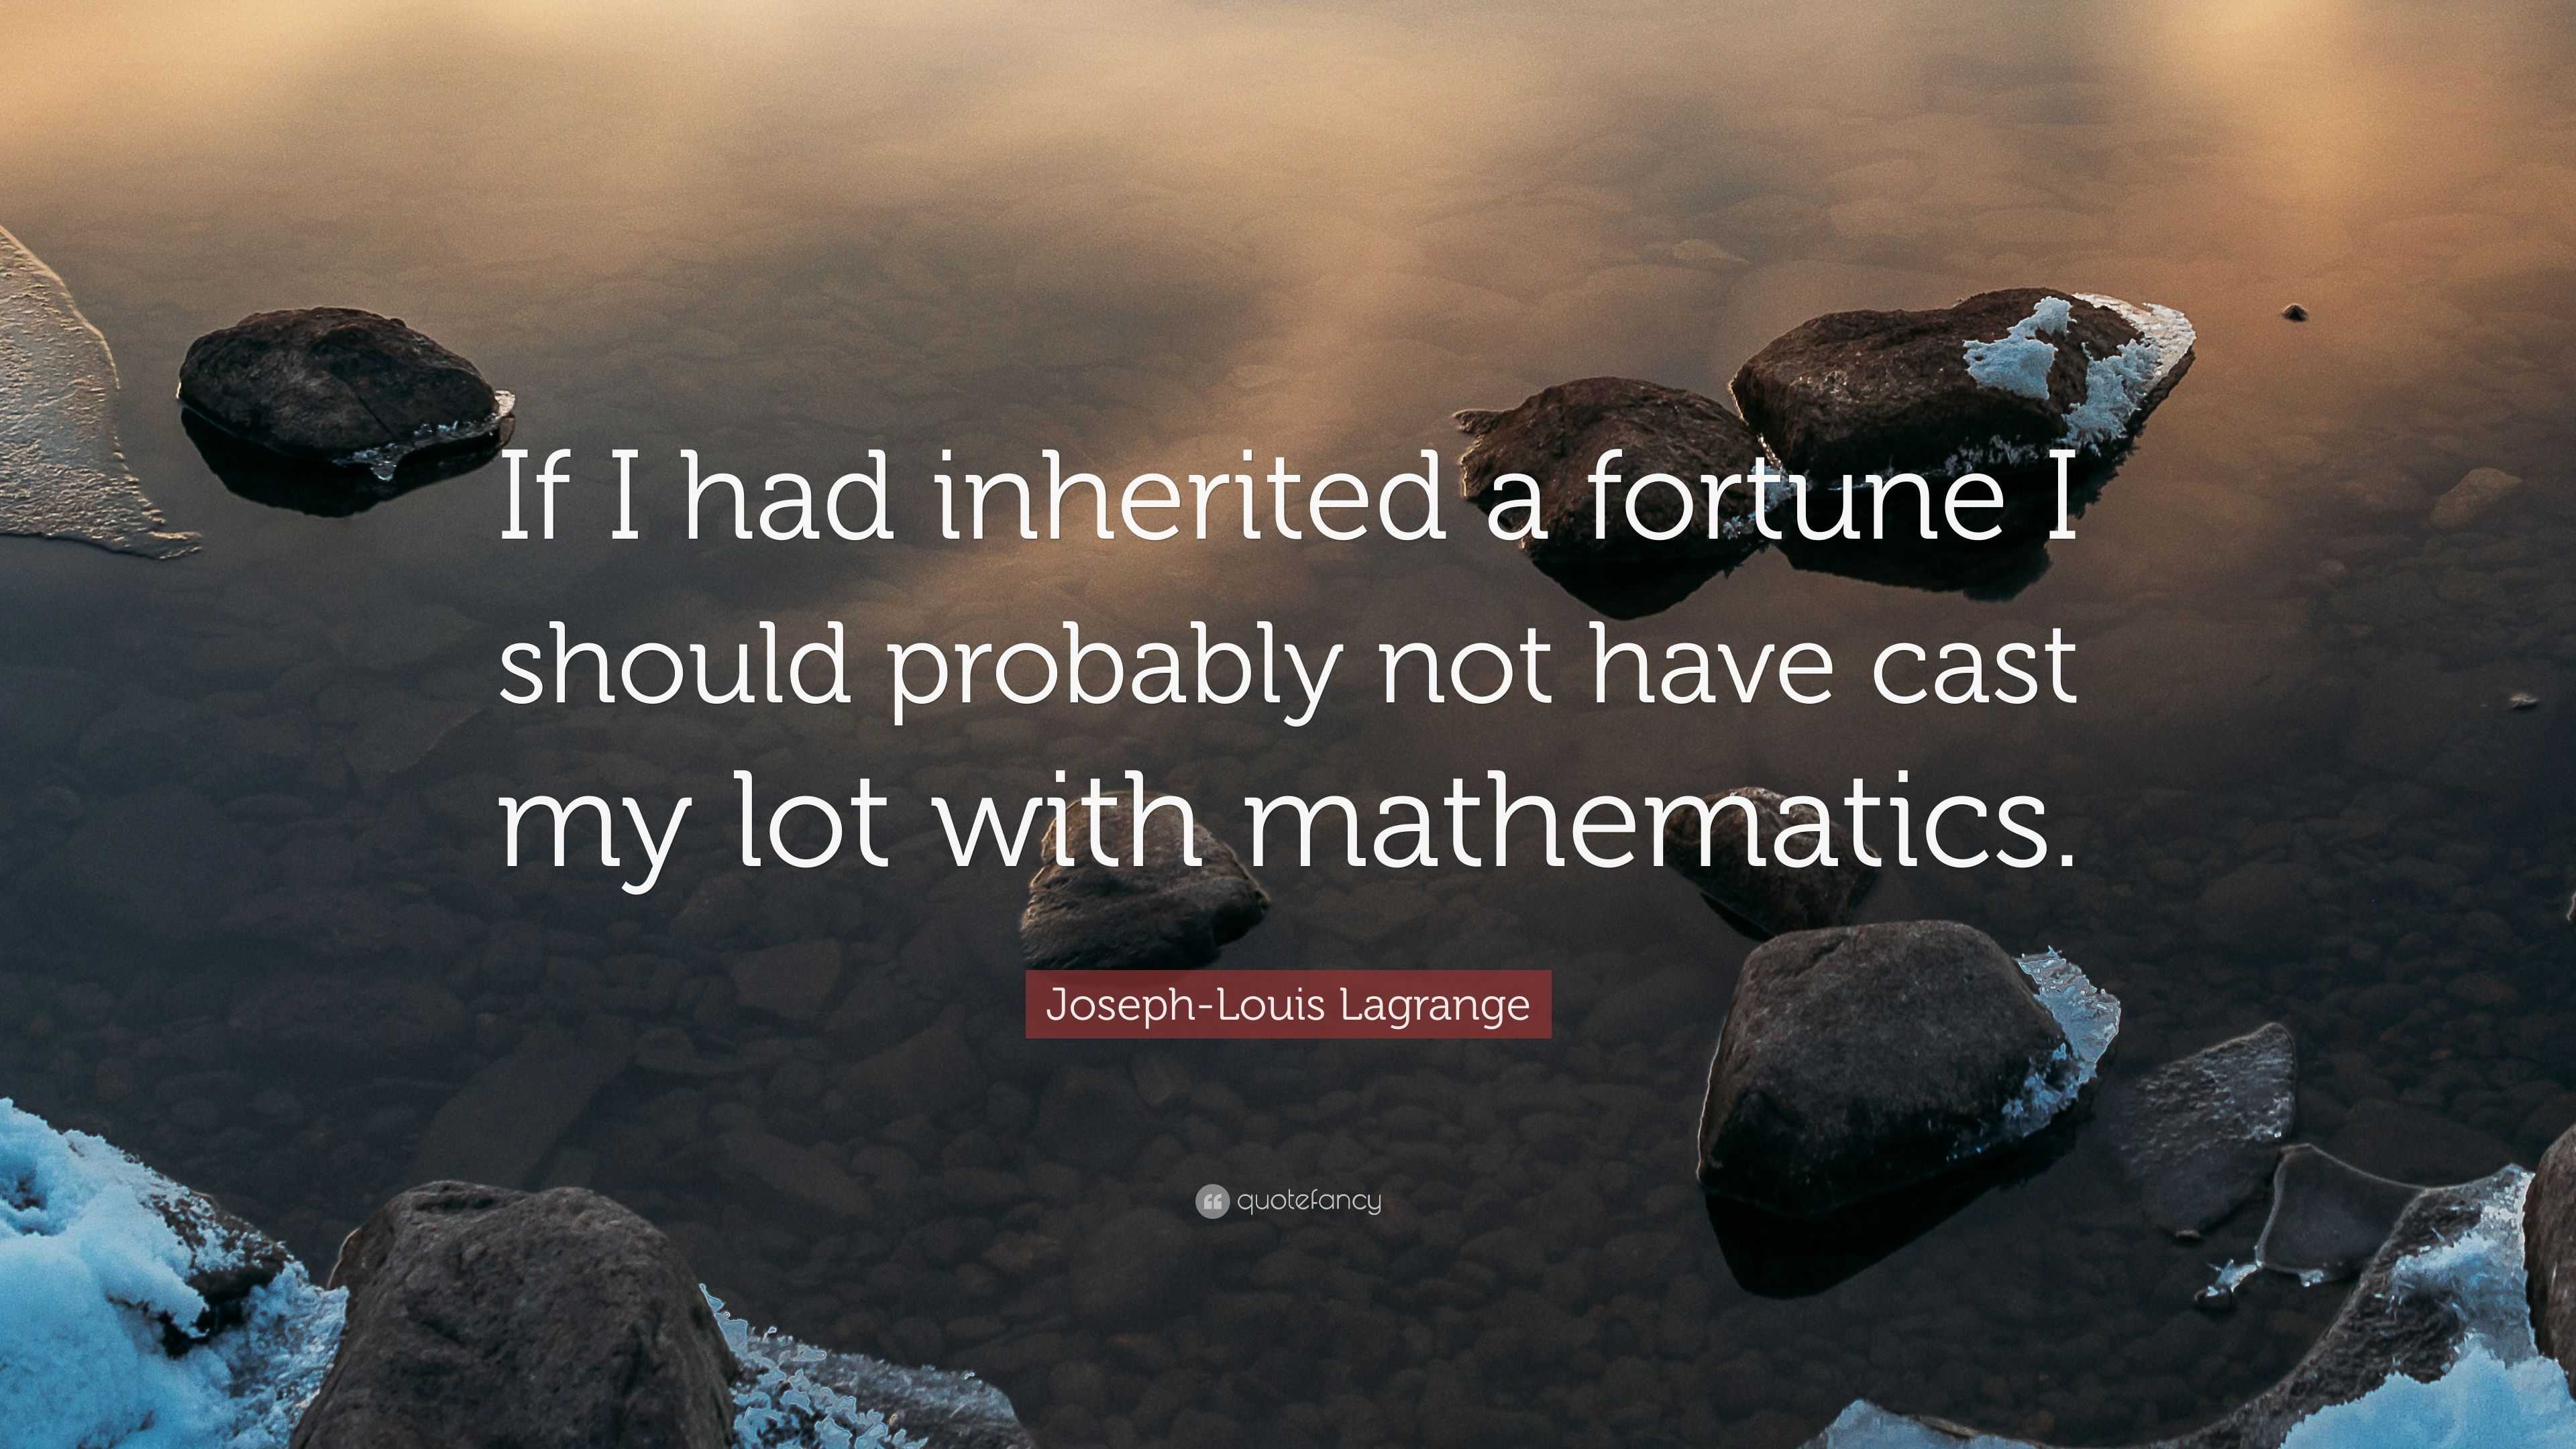 Joseph-Louis Lagrange Quote: “If I had inherited a fortune I should probably not have cast my ...